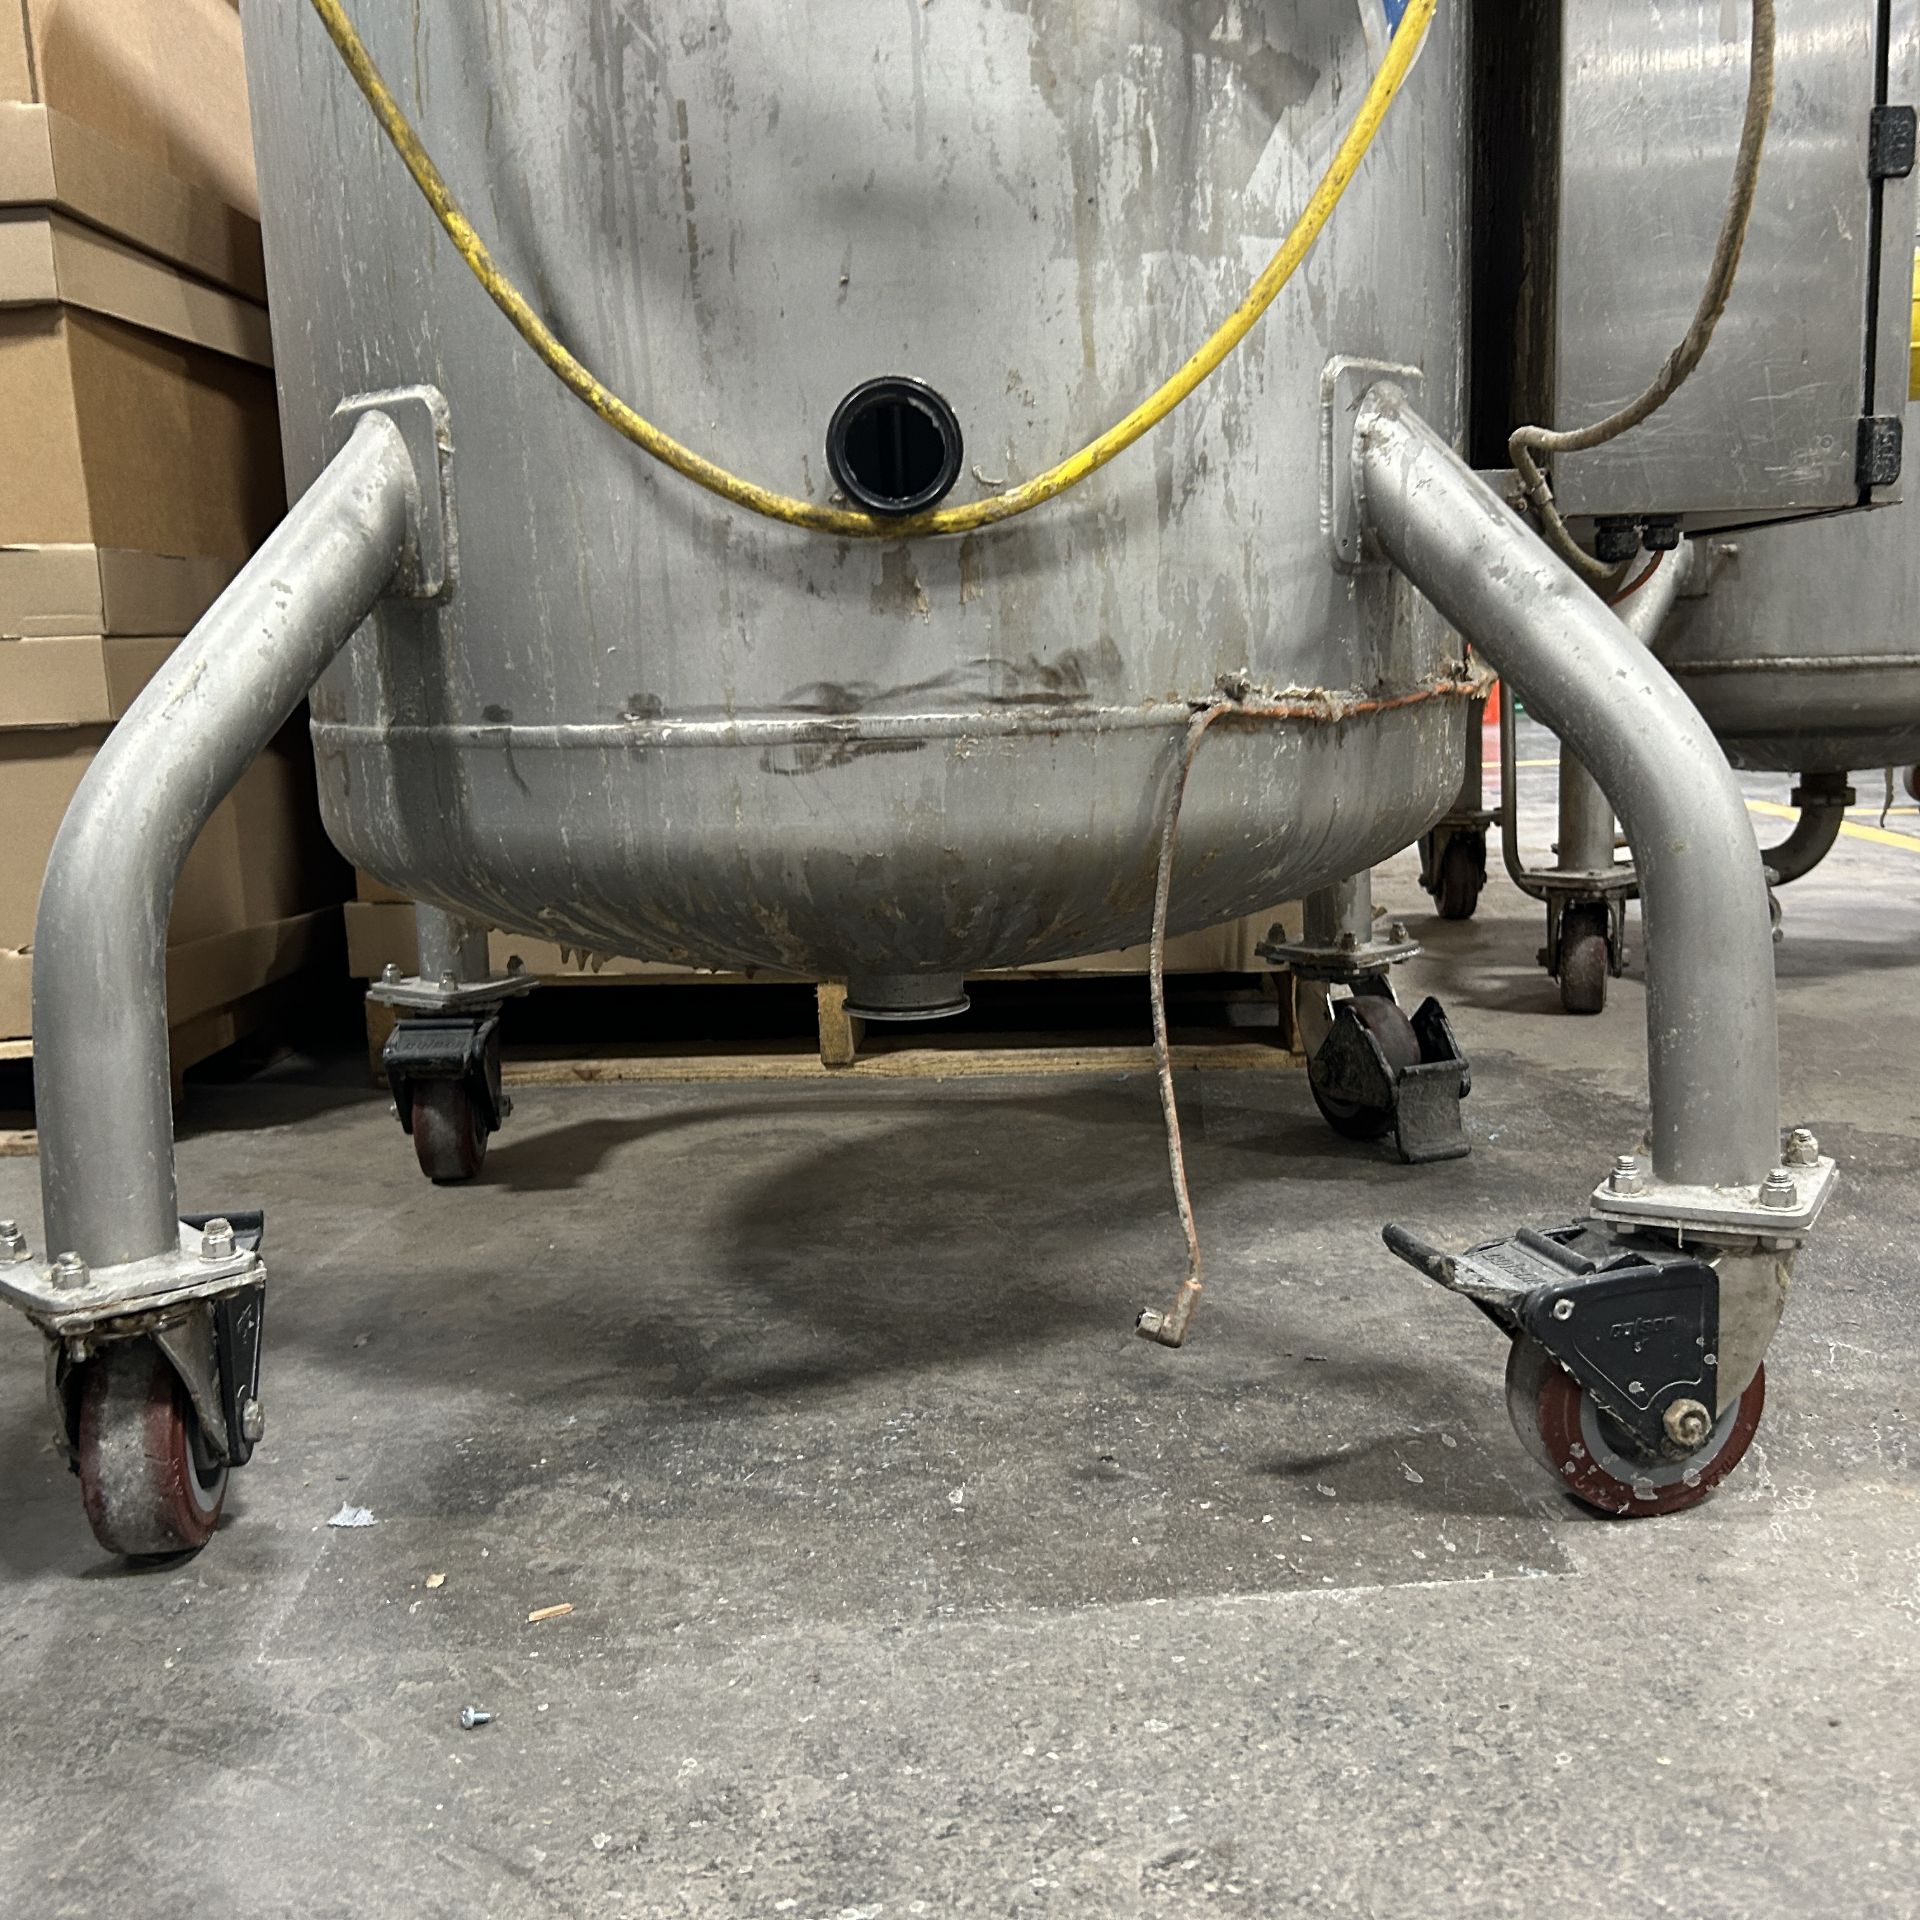 2020 Amherst Stainless Steel Agitation Pressure Pot - Image 6 of 8